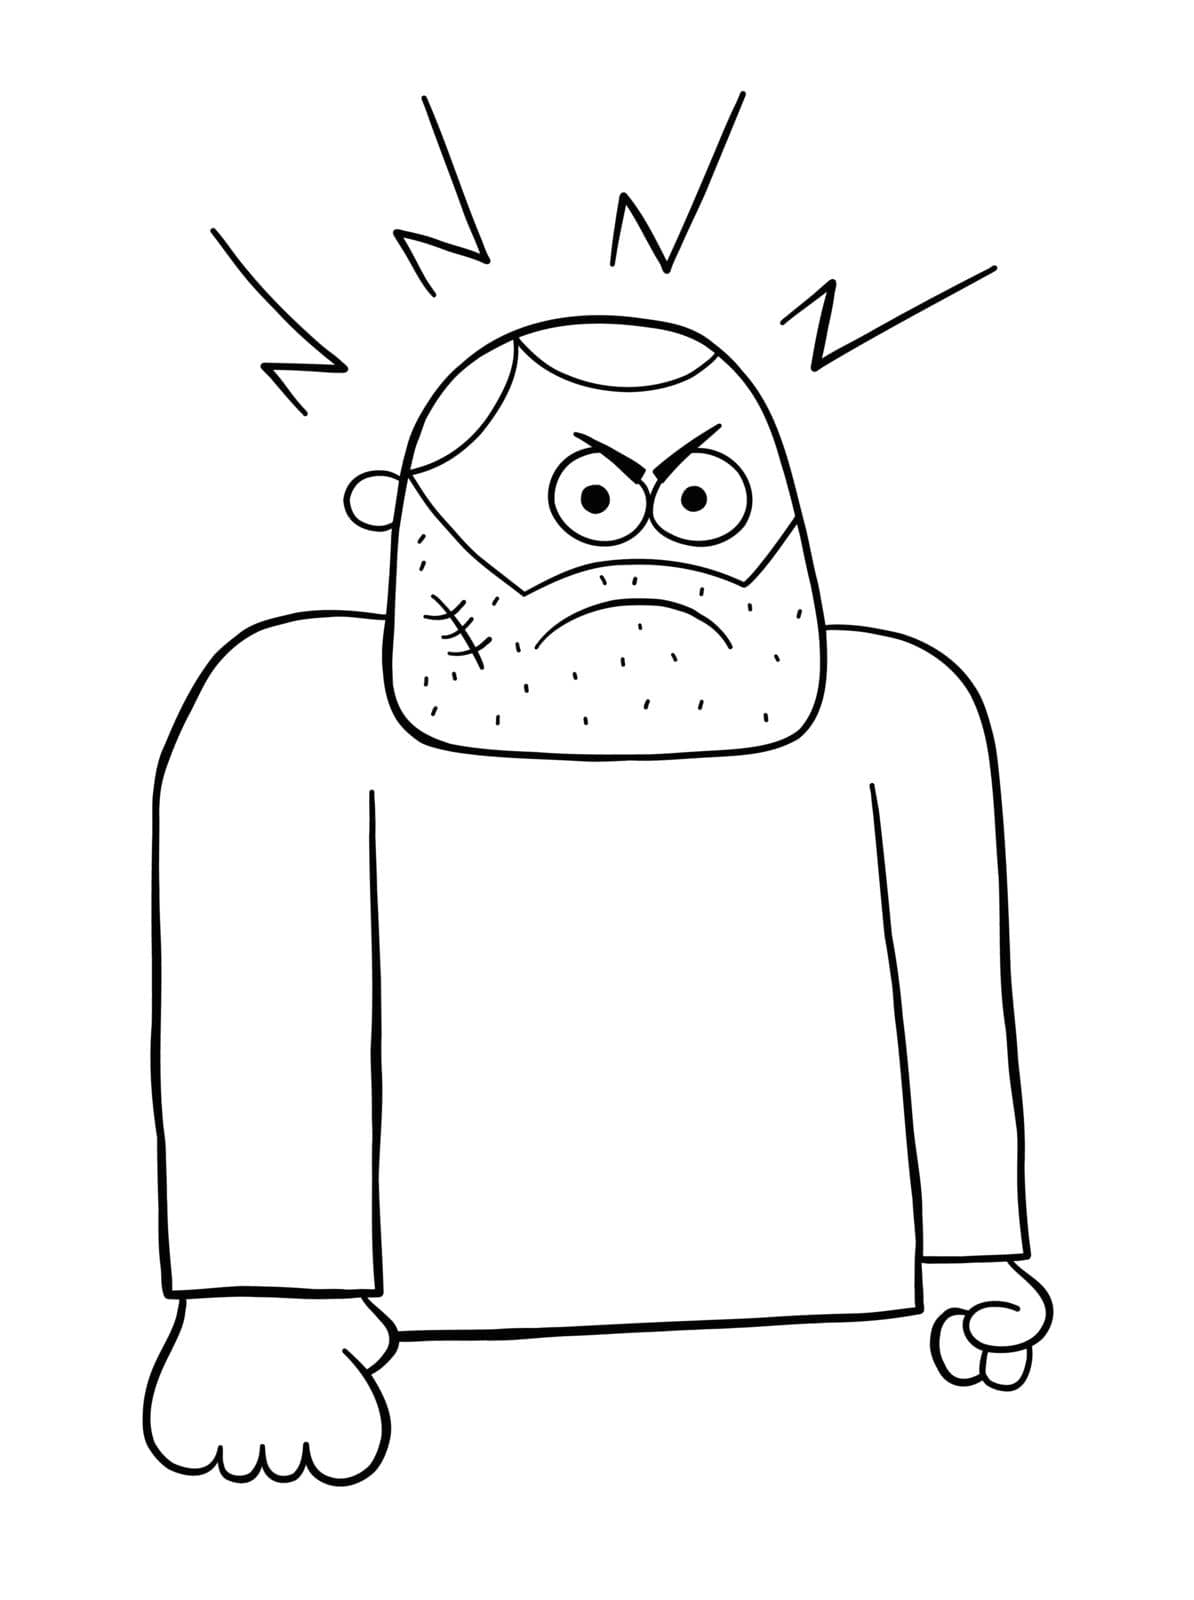 Cartoon angry bad man, vector illustration. Black outlined and white colored.